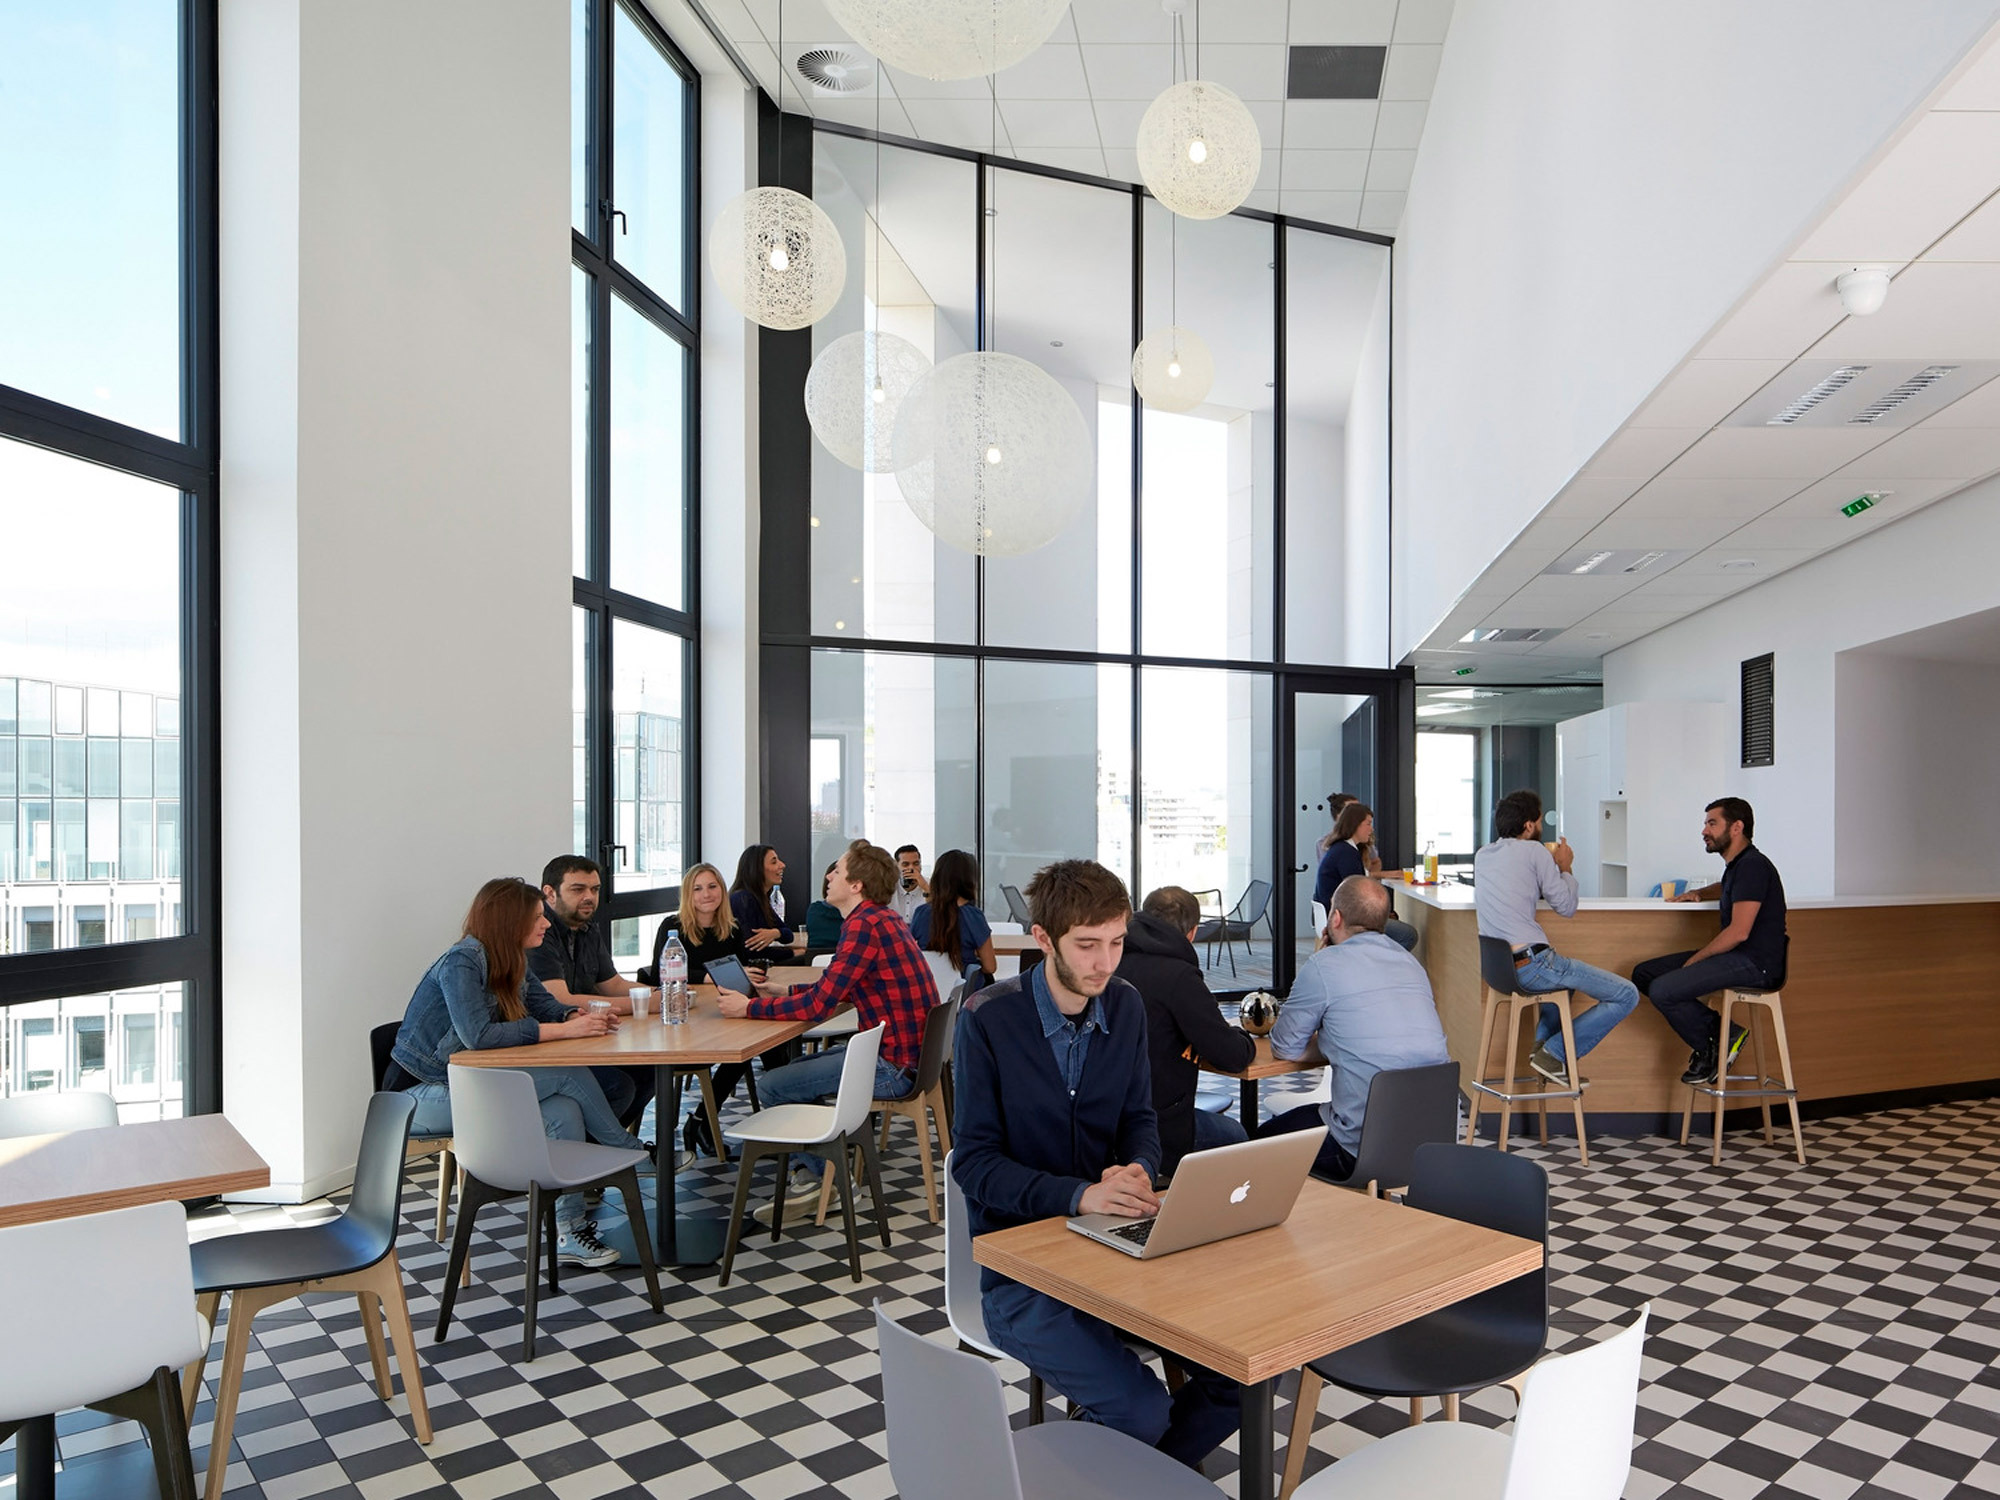 Modern office break room with large windows, geometric patterned flooring, minimalist white pendant lights, and a combination of communal and individual seating areas fostering both collaboration and independent work.